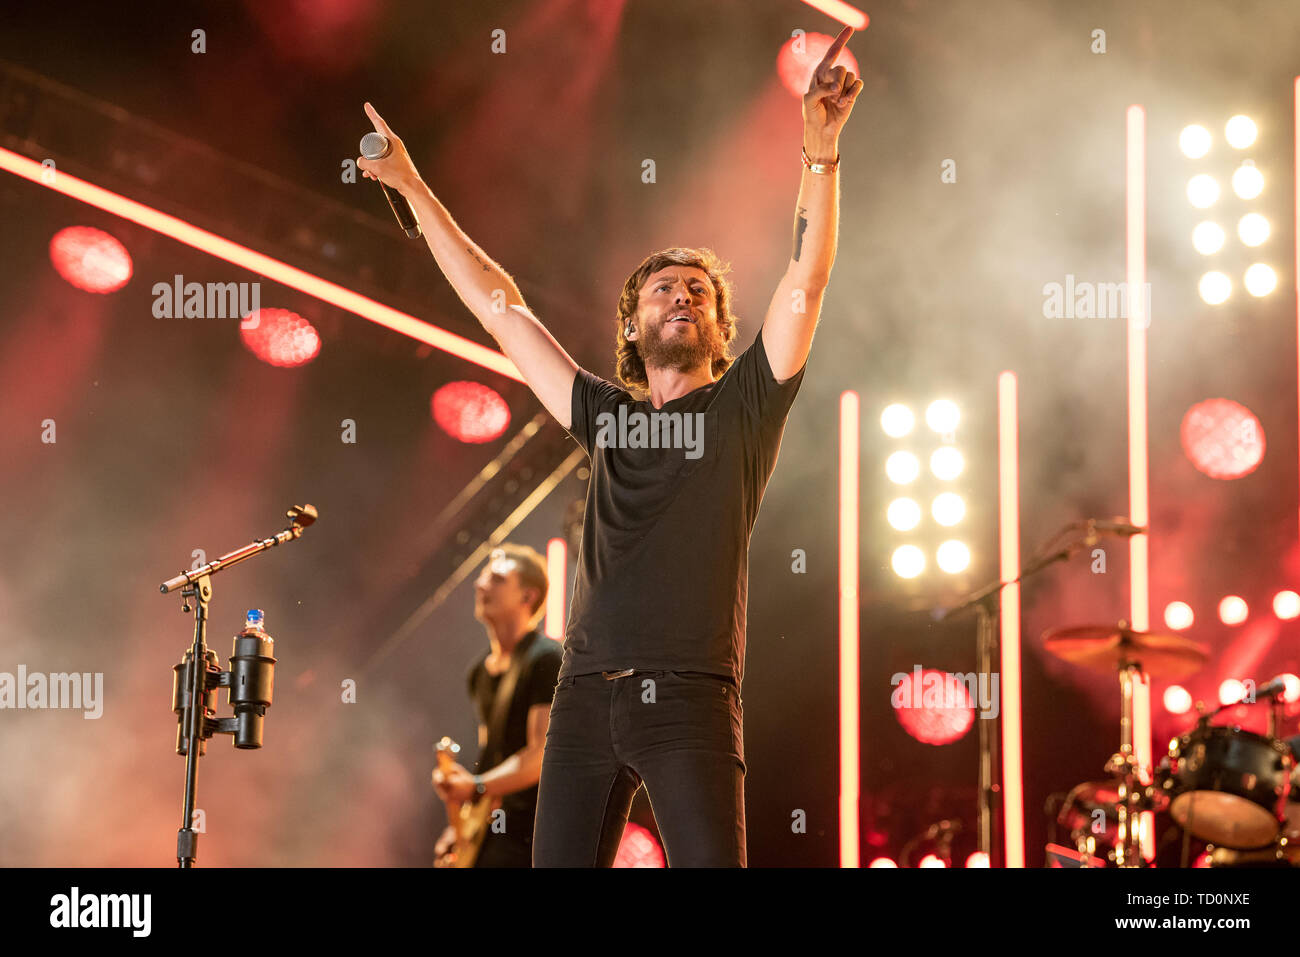 NASHVILLE, TENNESSEE - JUNE 09: Chris Janson performs on stage for day 4 of the 2019 CMA Music Festival on June 09, 2019 in Nashville, Tennessee. Photo: Andrew Wendowski for imageSPACE/MediaPunch Stock Photo